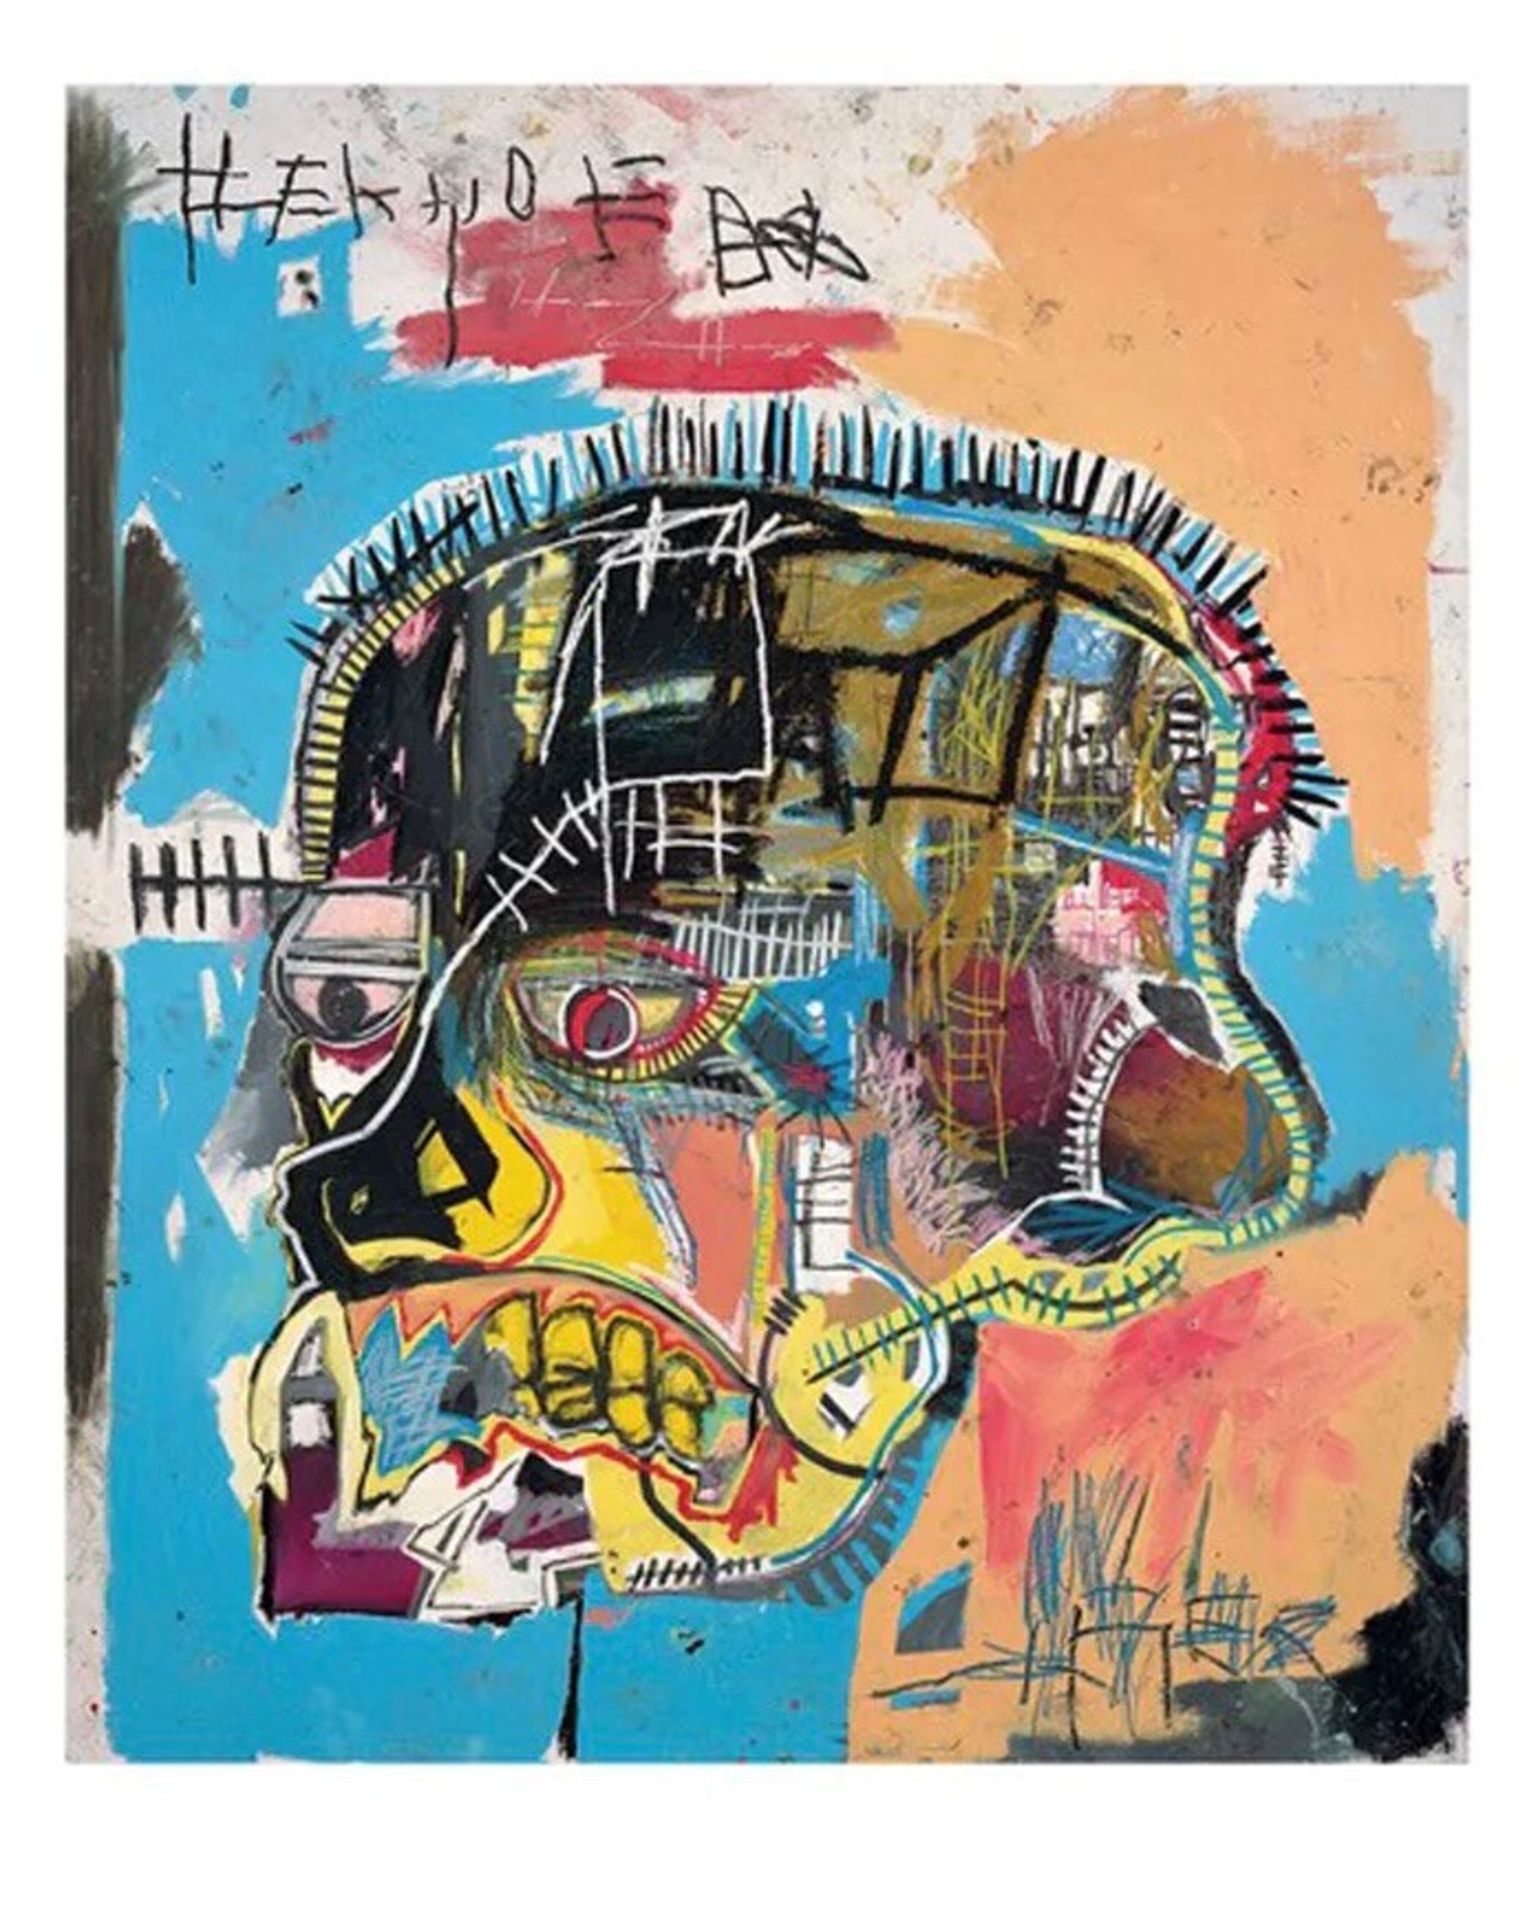 JEAN-MICHEL BASQUIAT Untitled (Skull) 1981 offset lithograph